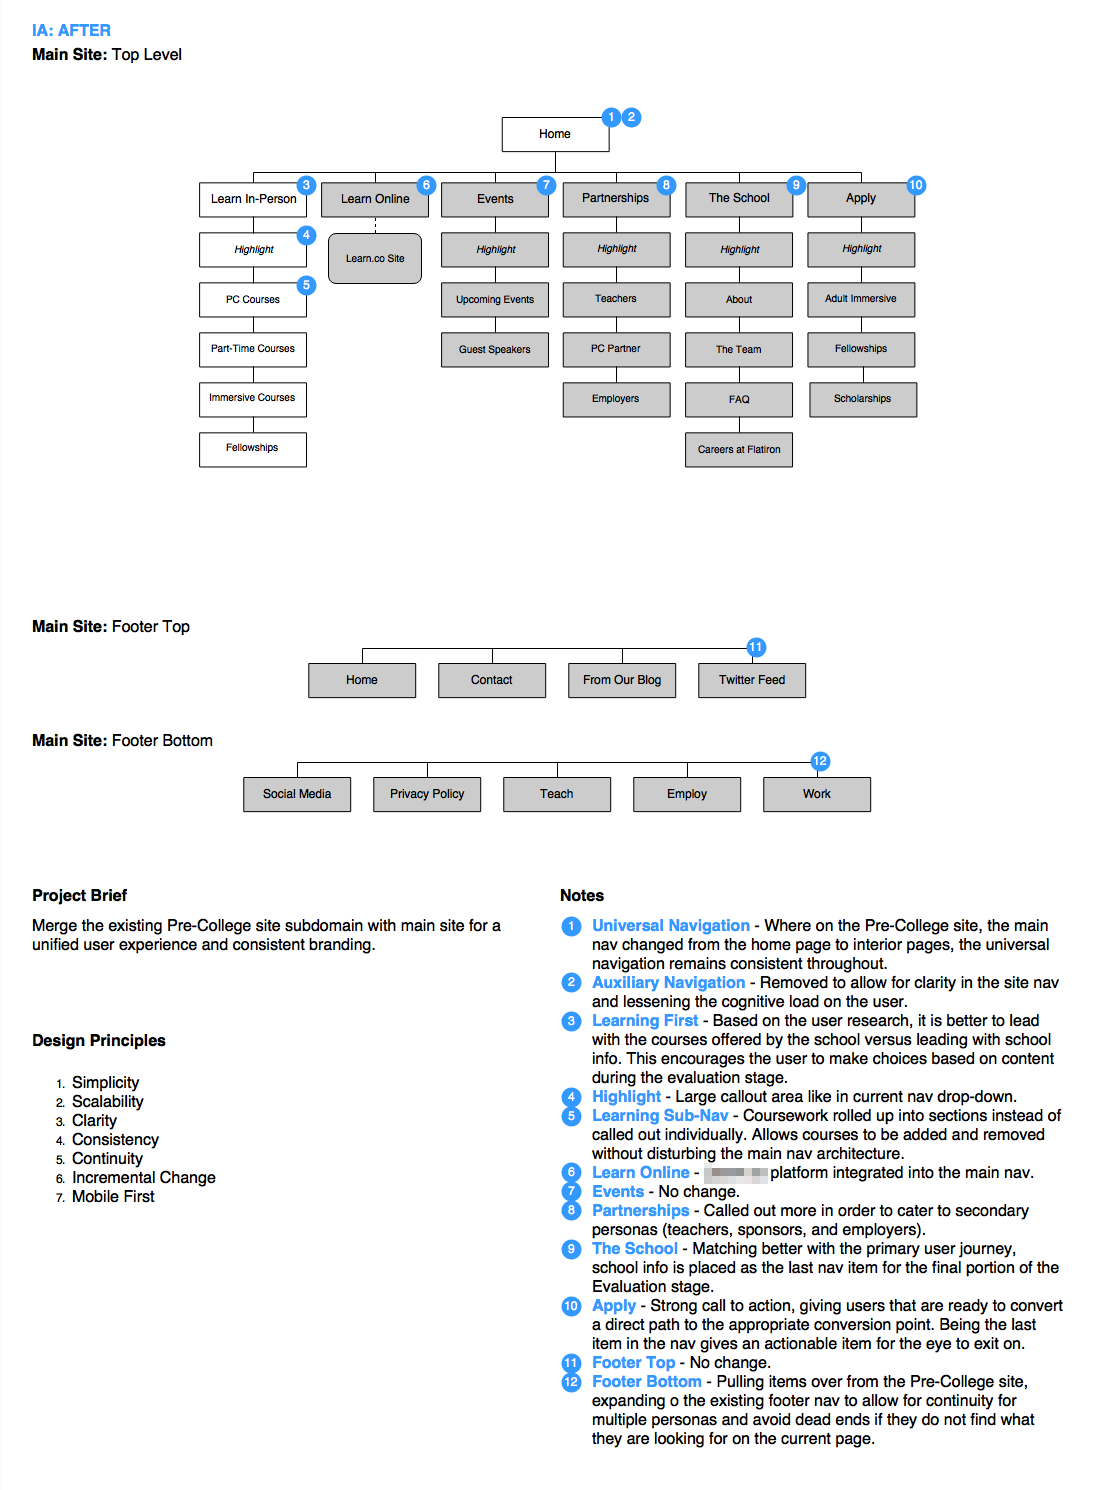 Recommendations: Information Architecture | Collaborative Process